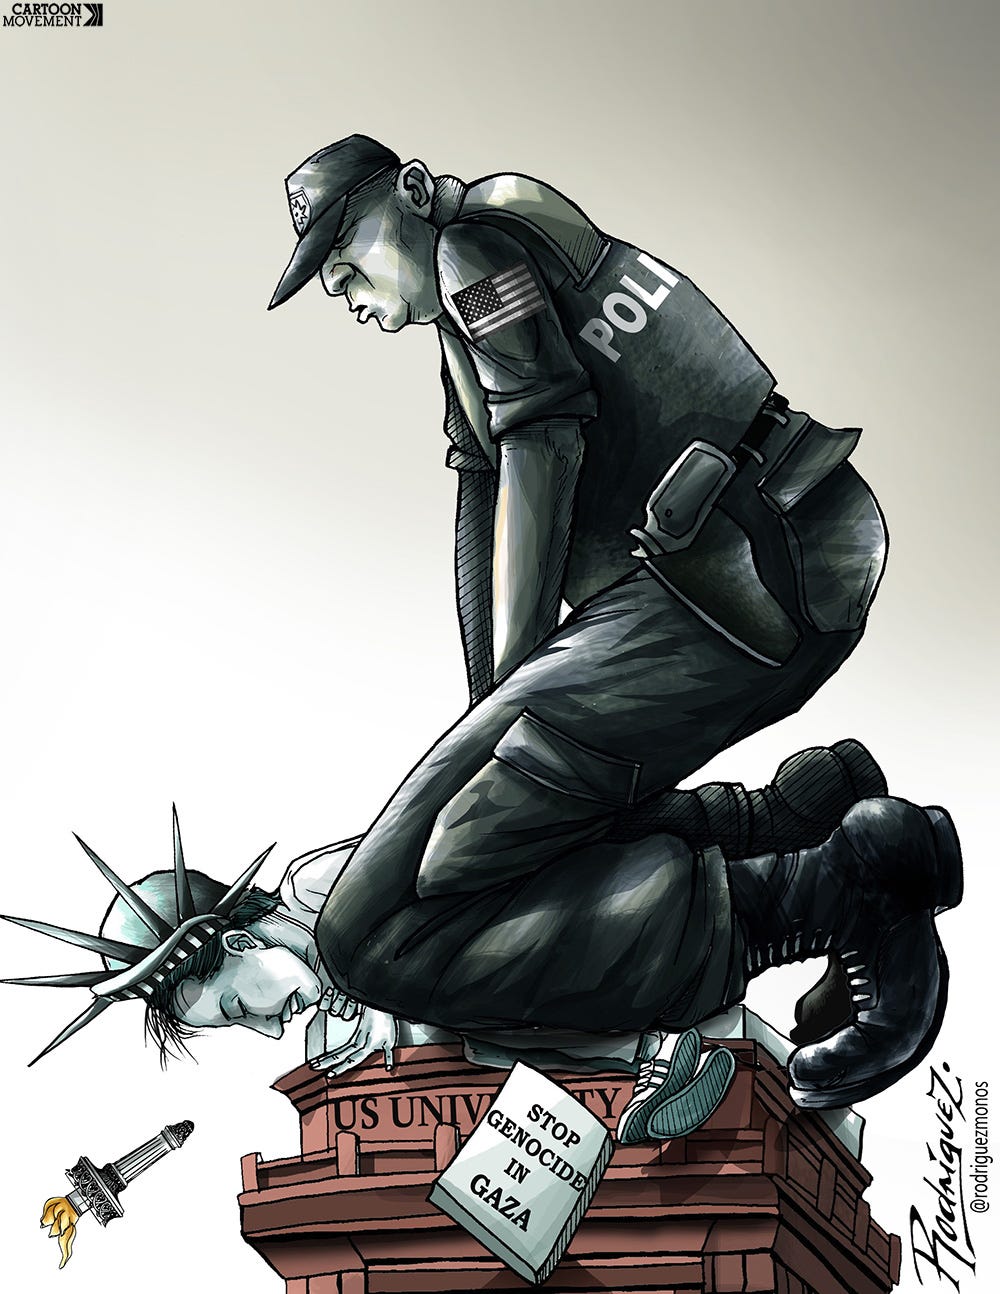 Cartoon showing the Statue of Liberty lying down on her plinth, while a policeman sits on top of her with a knee in her neck. Lady Liberty is holding a plaque with the text ‘Stop genocide in Gaza’.